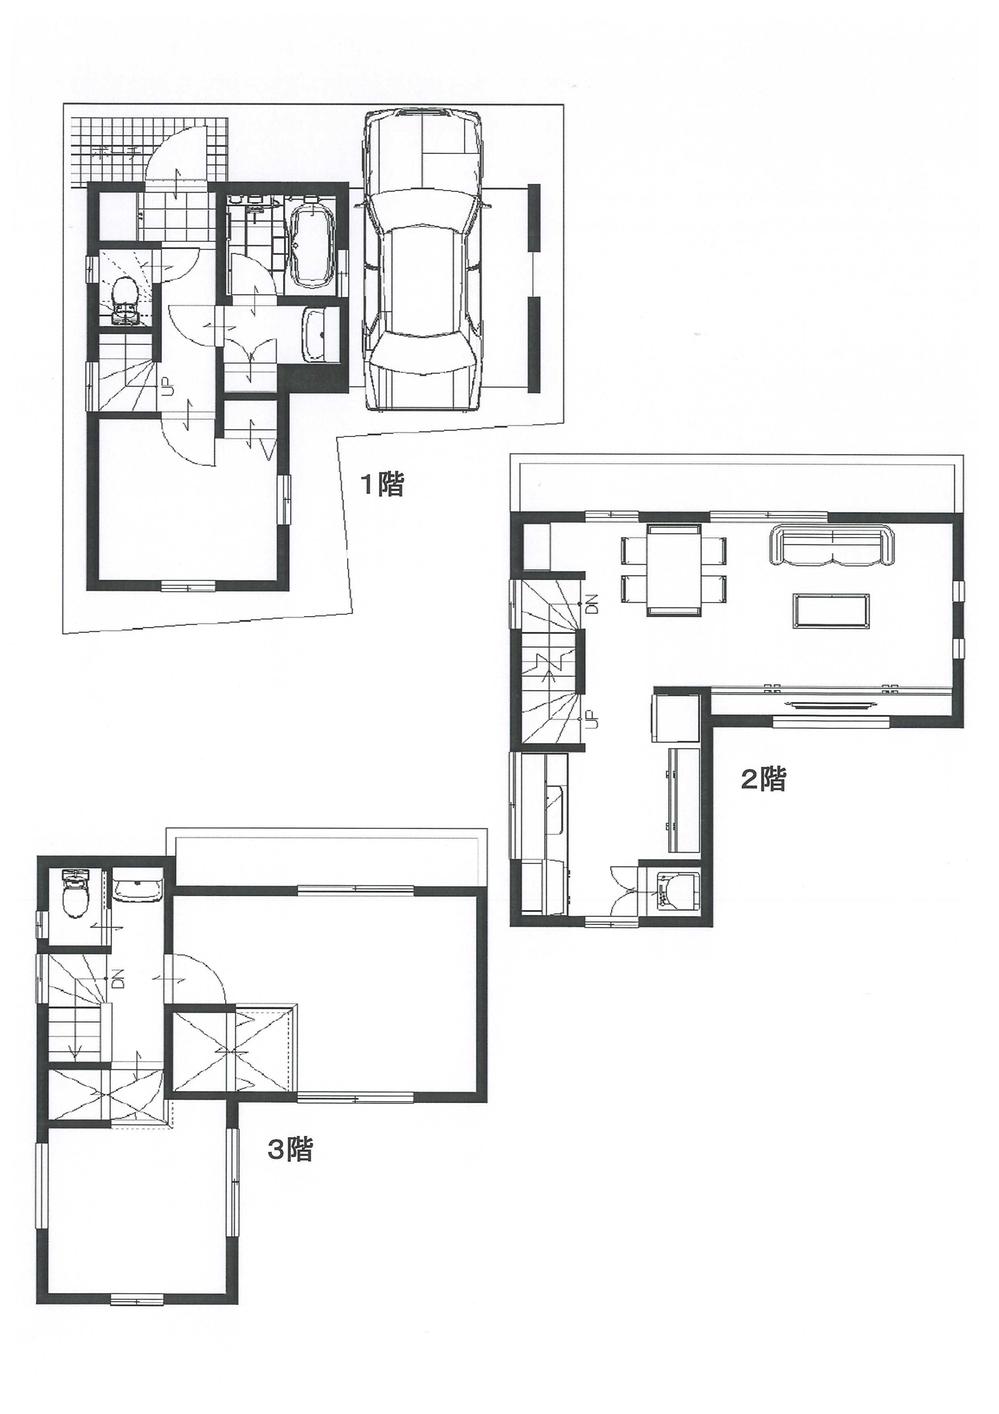 Floor plan. 49,980,000 yen, 2LDK + S (storeroom), Land area 51.23 sq m , Building area 79.07 sq m living building with storage TV board Kitchen building with with storage Living room product with interference